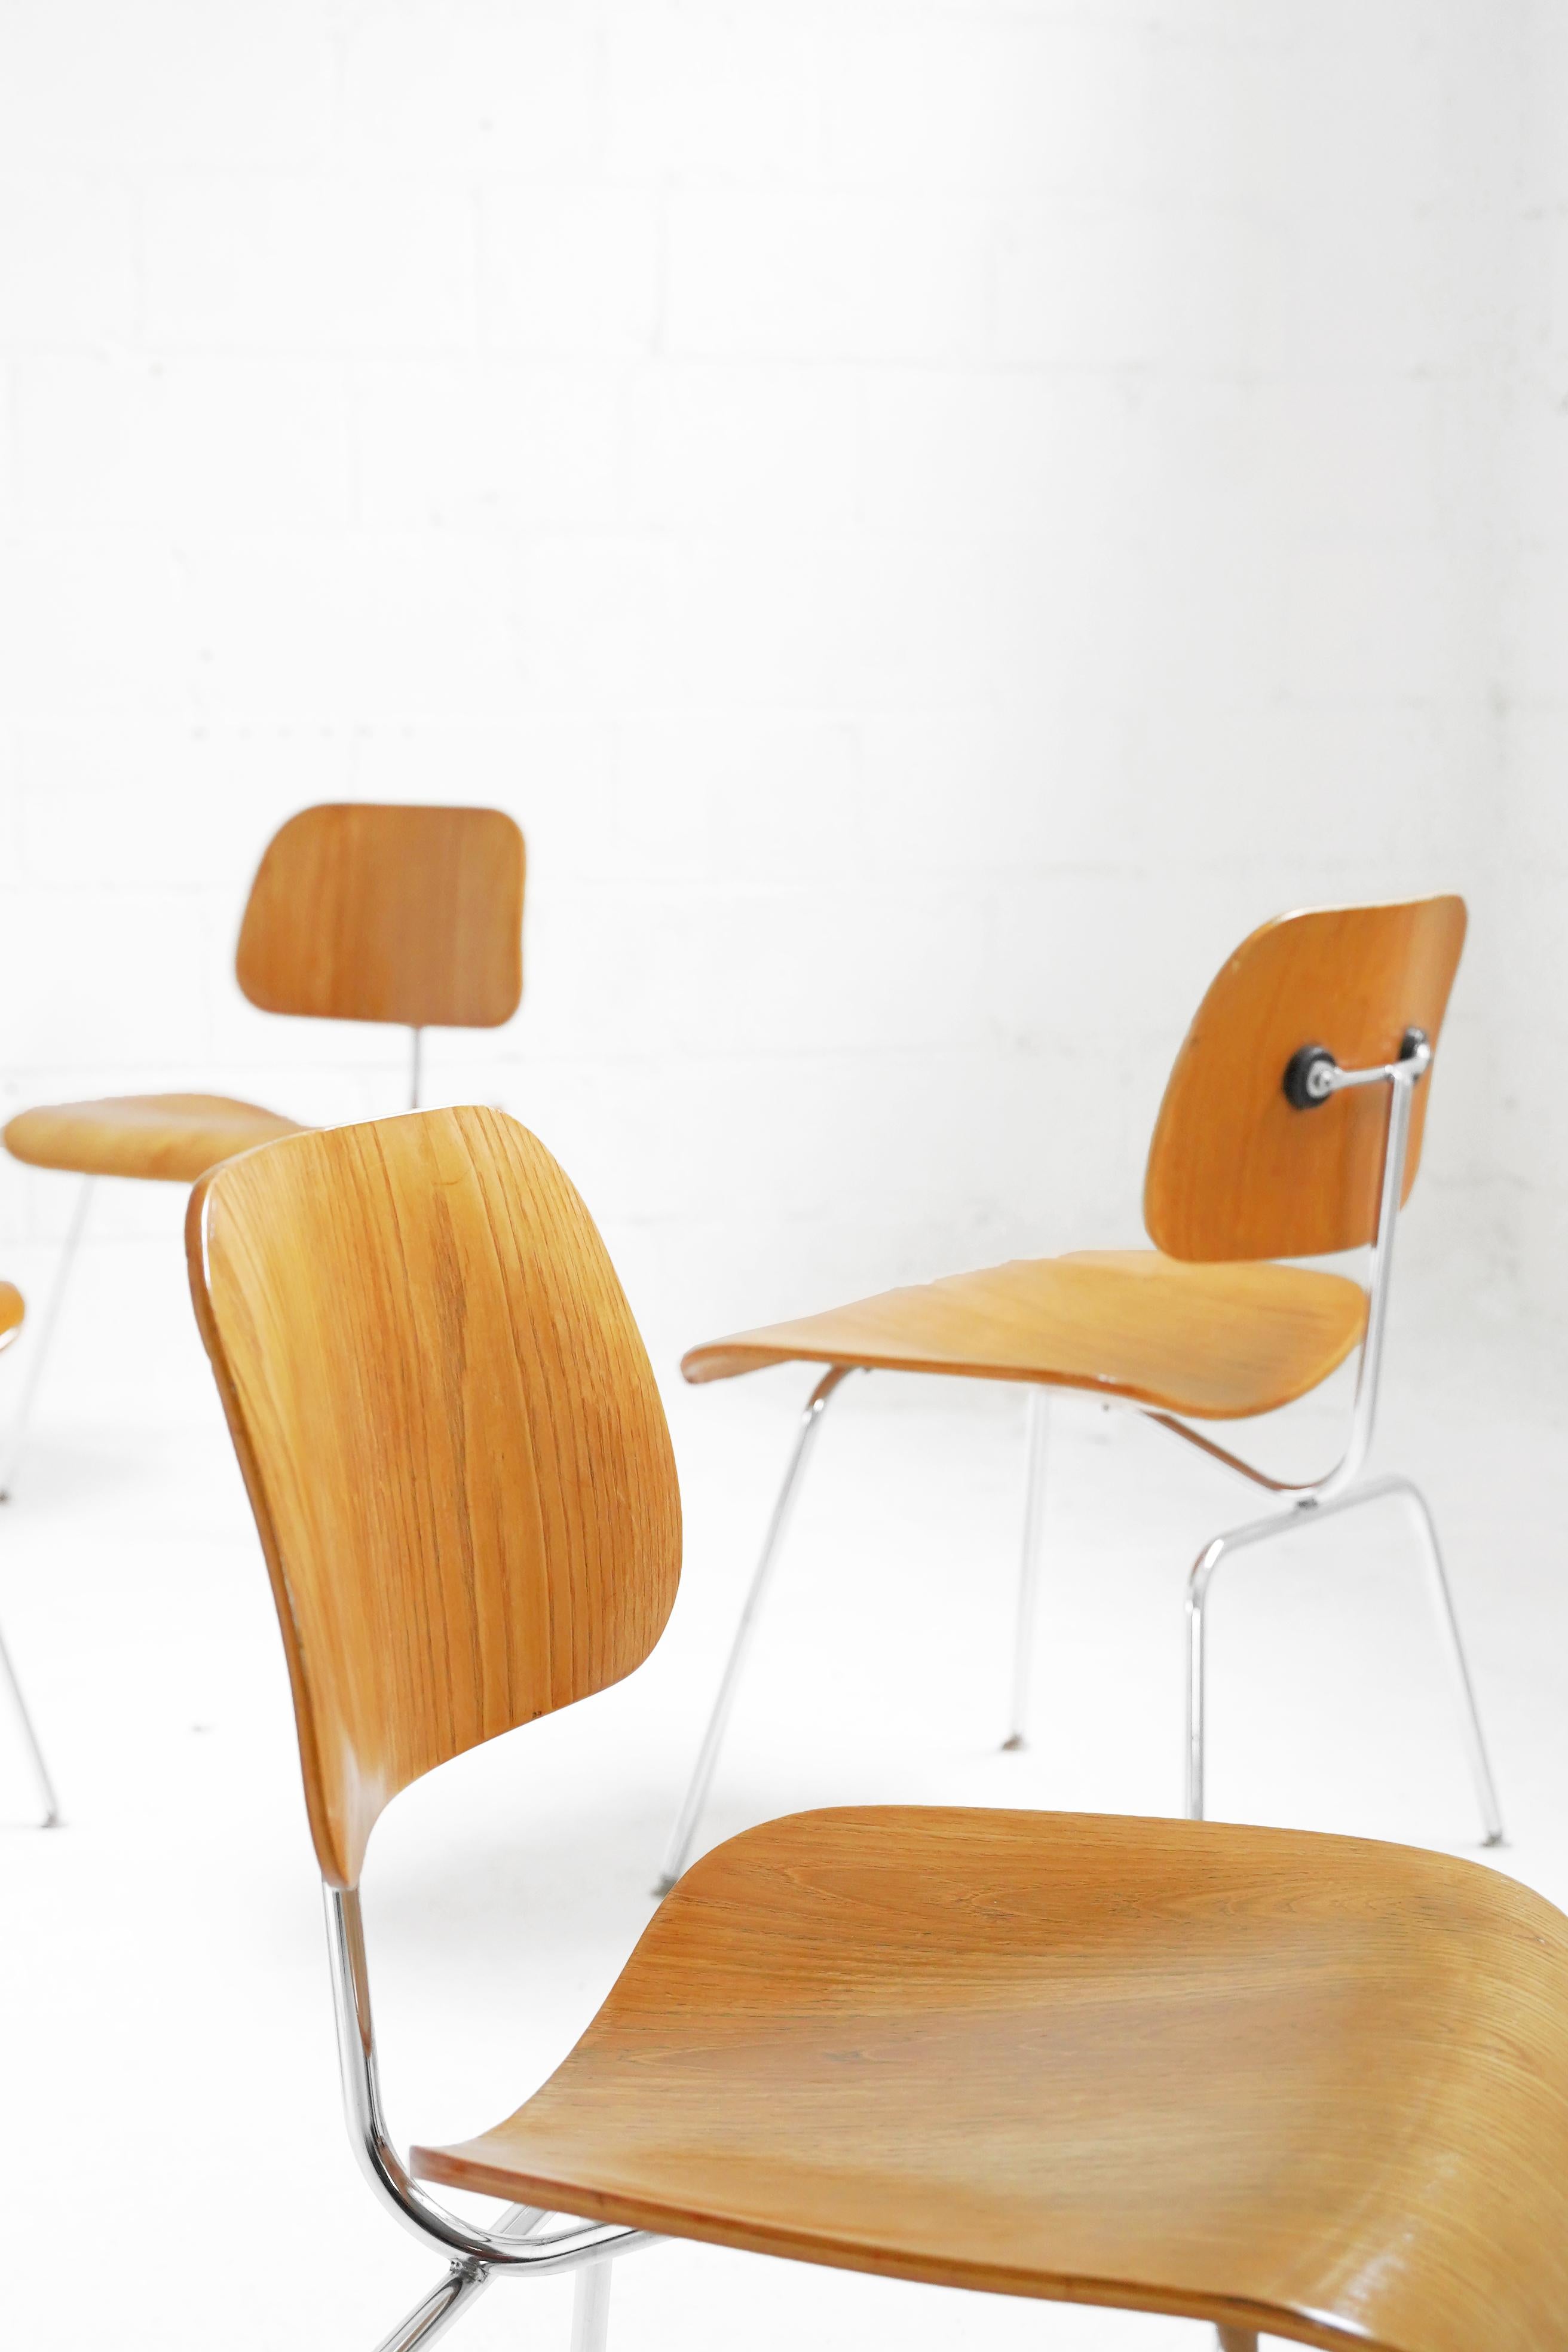 Stunning set of Eames DCM chairs for Herman Miller. Overall in good vintage condition with minor wear and chipping shown in photos. 4 Chairs have original glides on feet, 2 chairs have had them replaced. Chairs are 2001, 2002, 2009 Production. 6